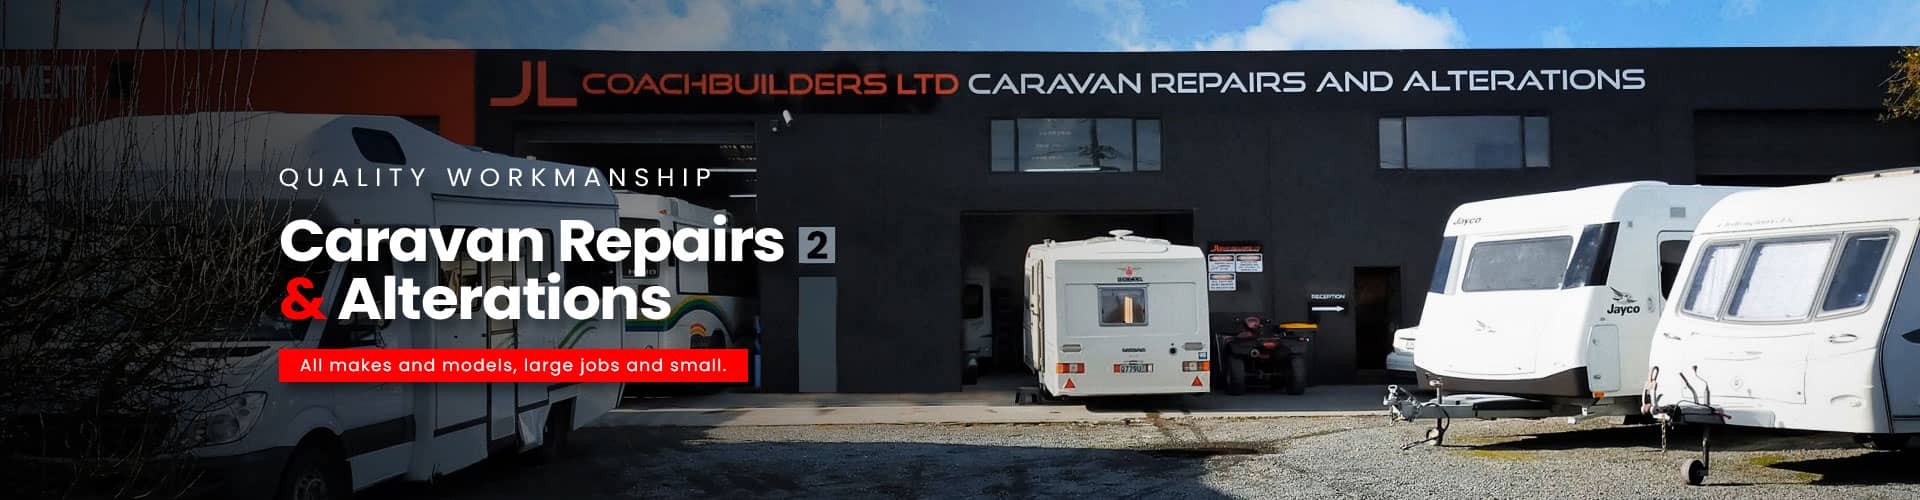 Caravan Repairs in Christchurch: Tips for Finding the Best Service